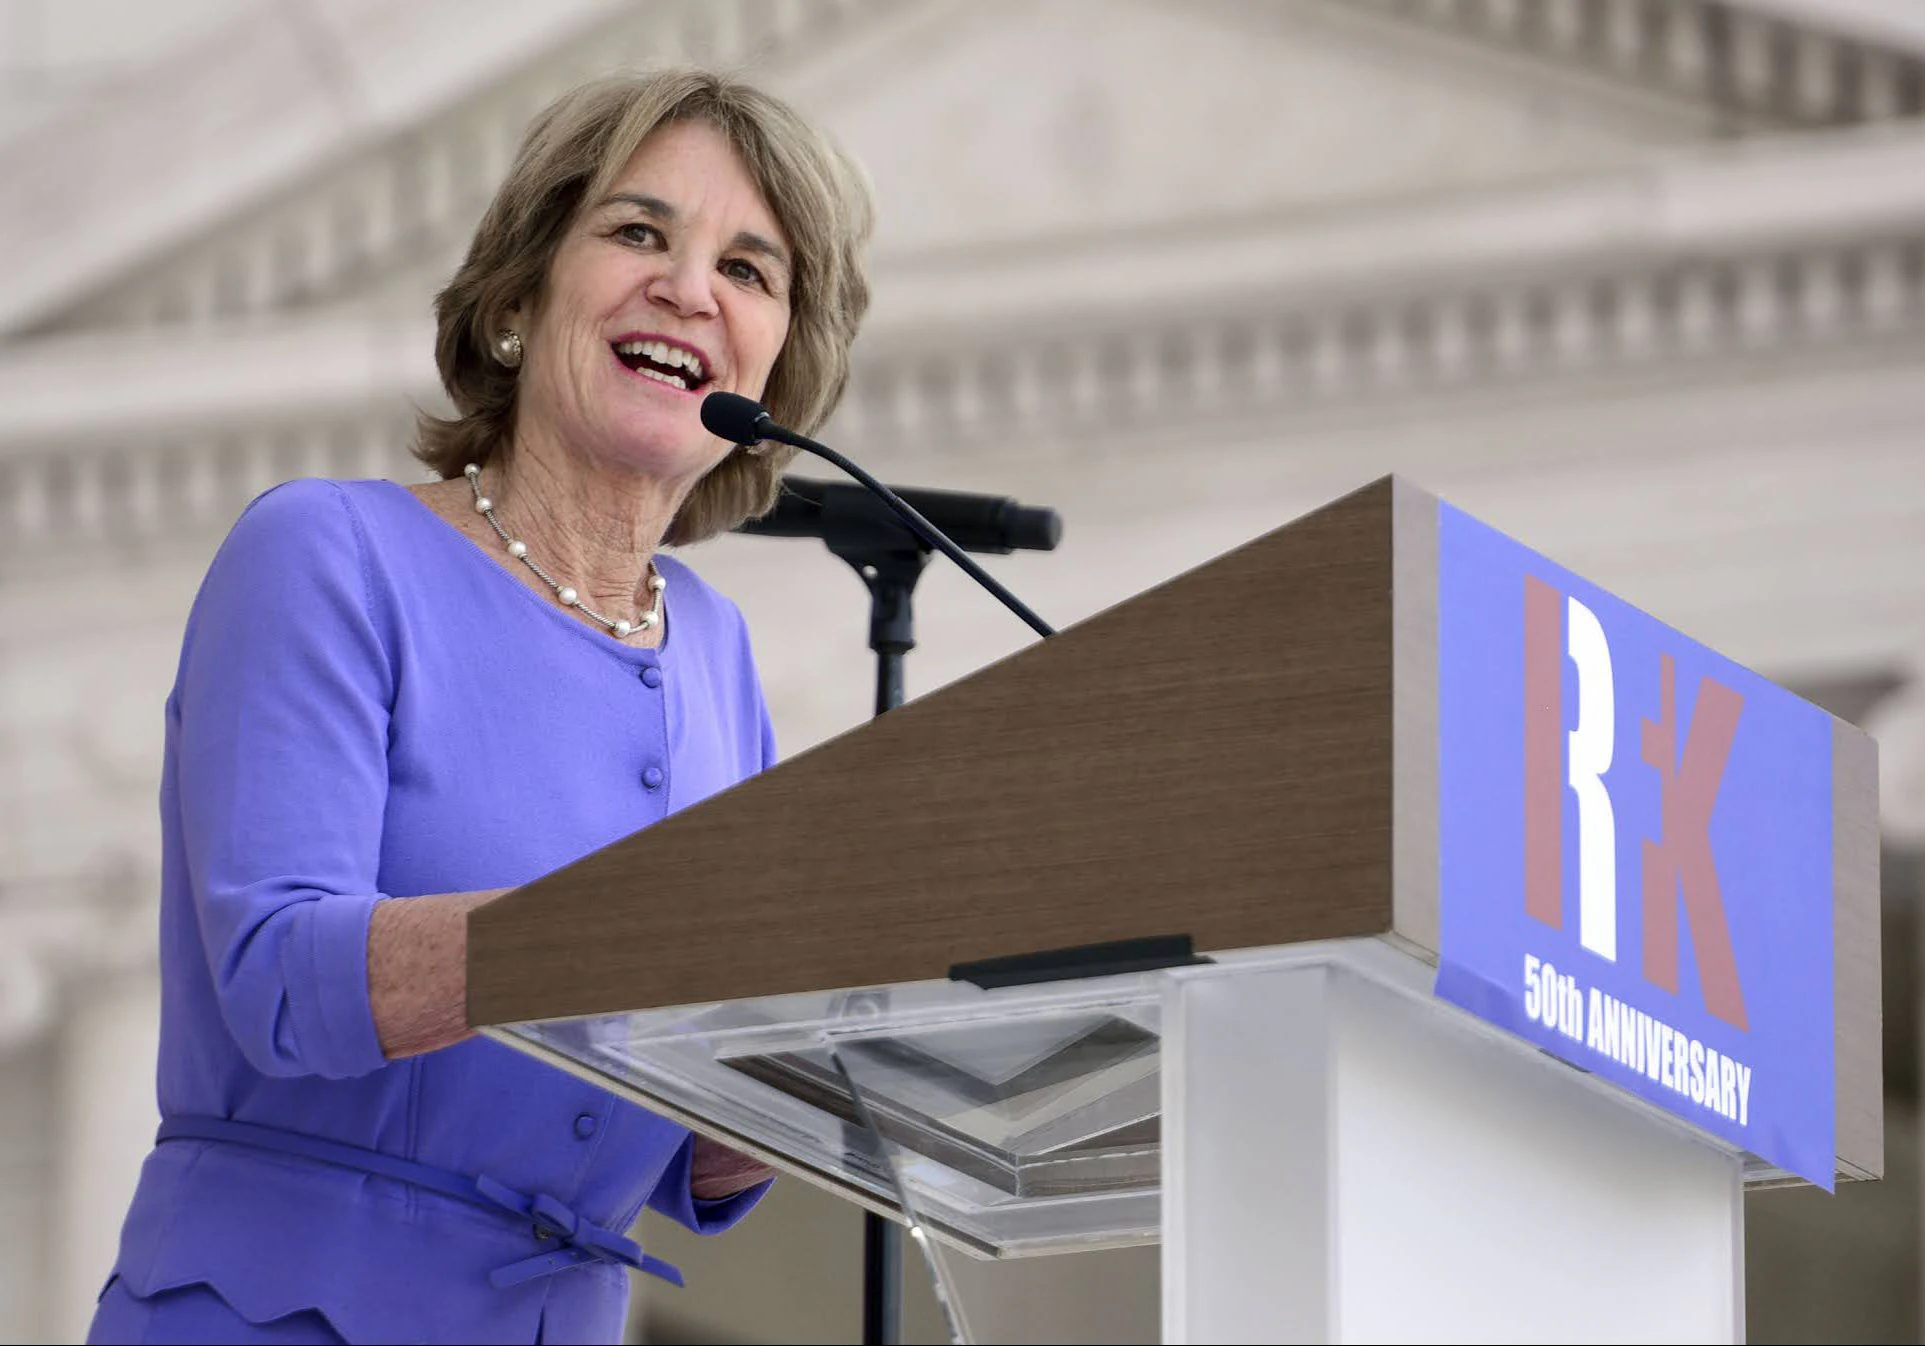 ARLINGTON, VA - JUNE 06:  Kathleen Kennedy Townsend delivers opening remarks during a Remembrance and Celebration of the Life & Enduring Legacy of Robert F. Kennedy event taking place at Arlington National Cemetery on June 6, 2018 in Arlington, Virginia.  (Photo by Leigh Vogel/Getty Images for RFK Human Rights)/Kathleen Kennedy